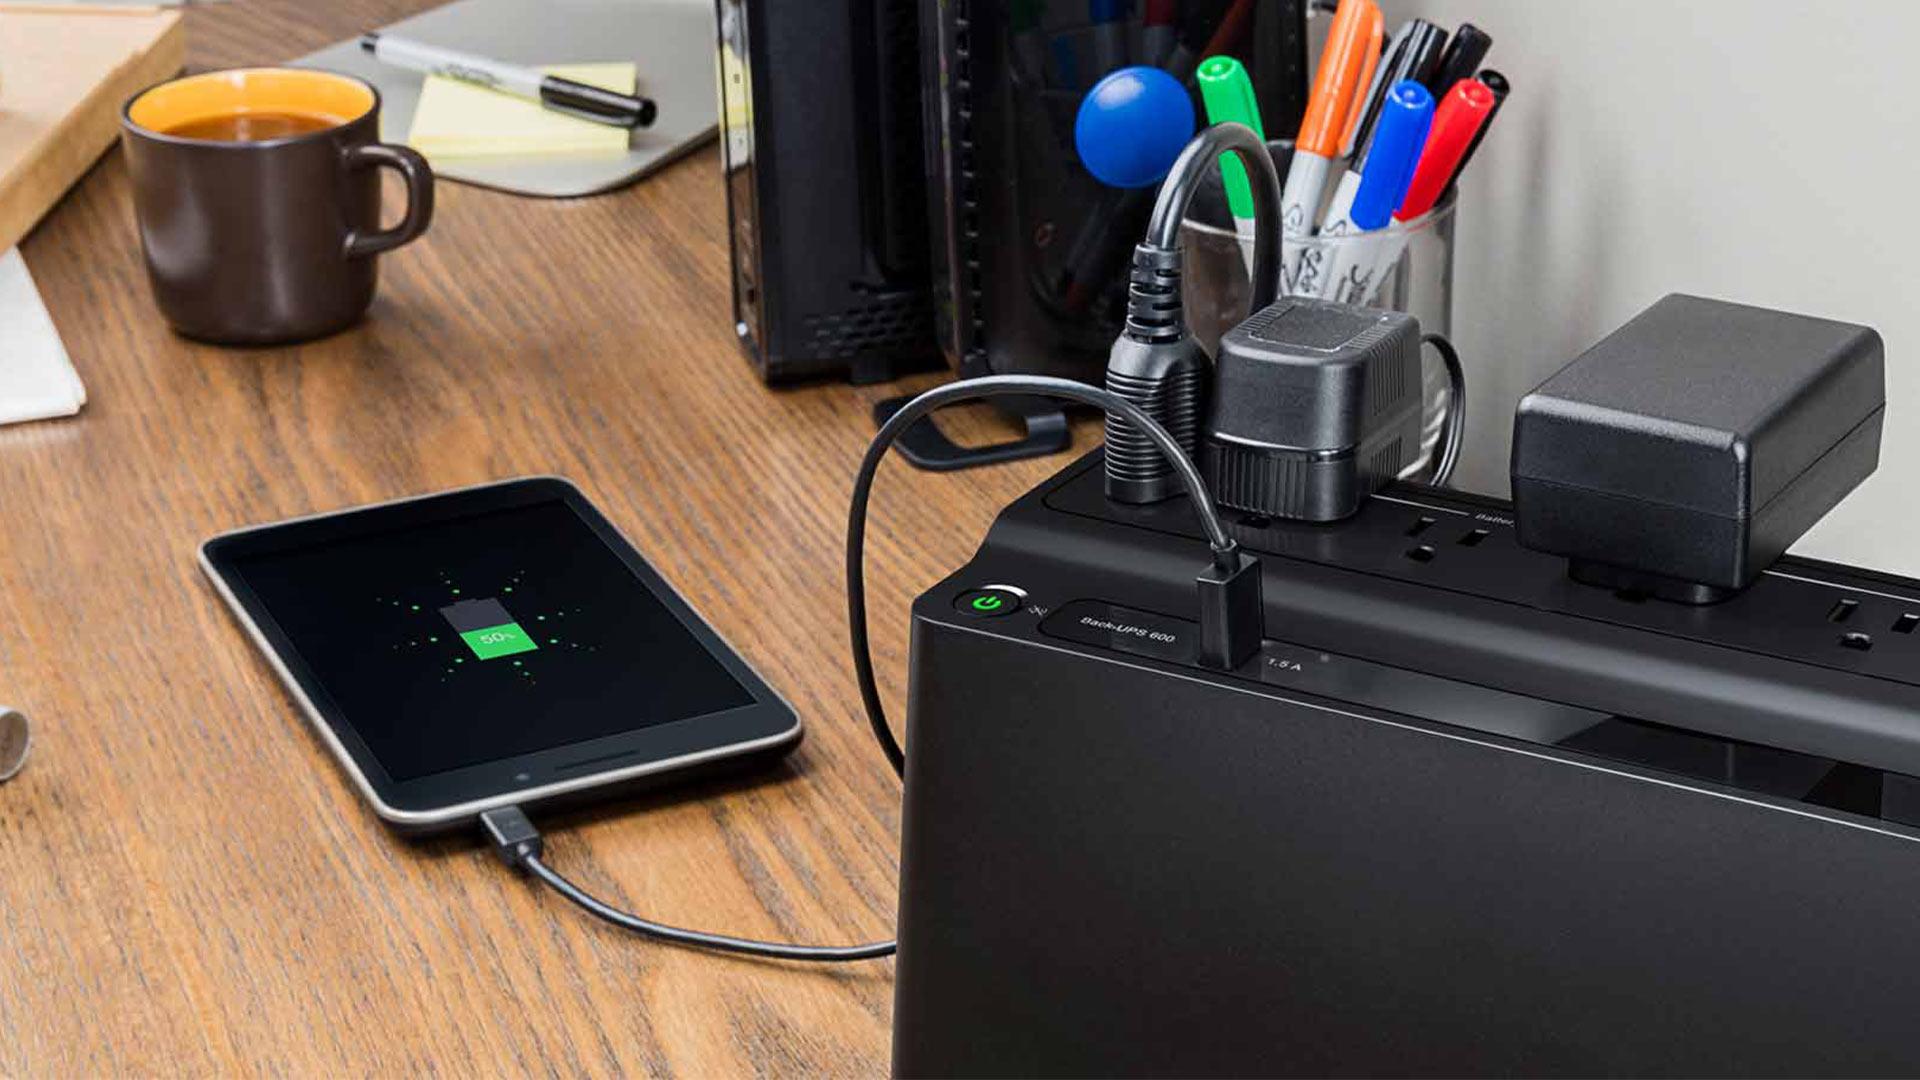 mobile charge with battery backup ups